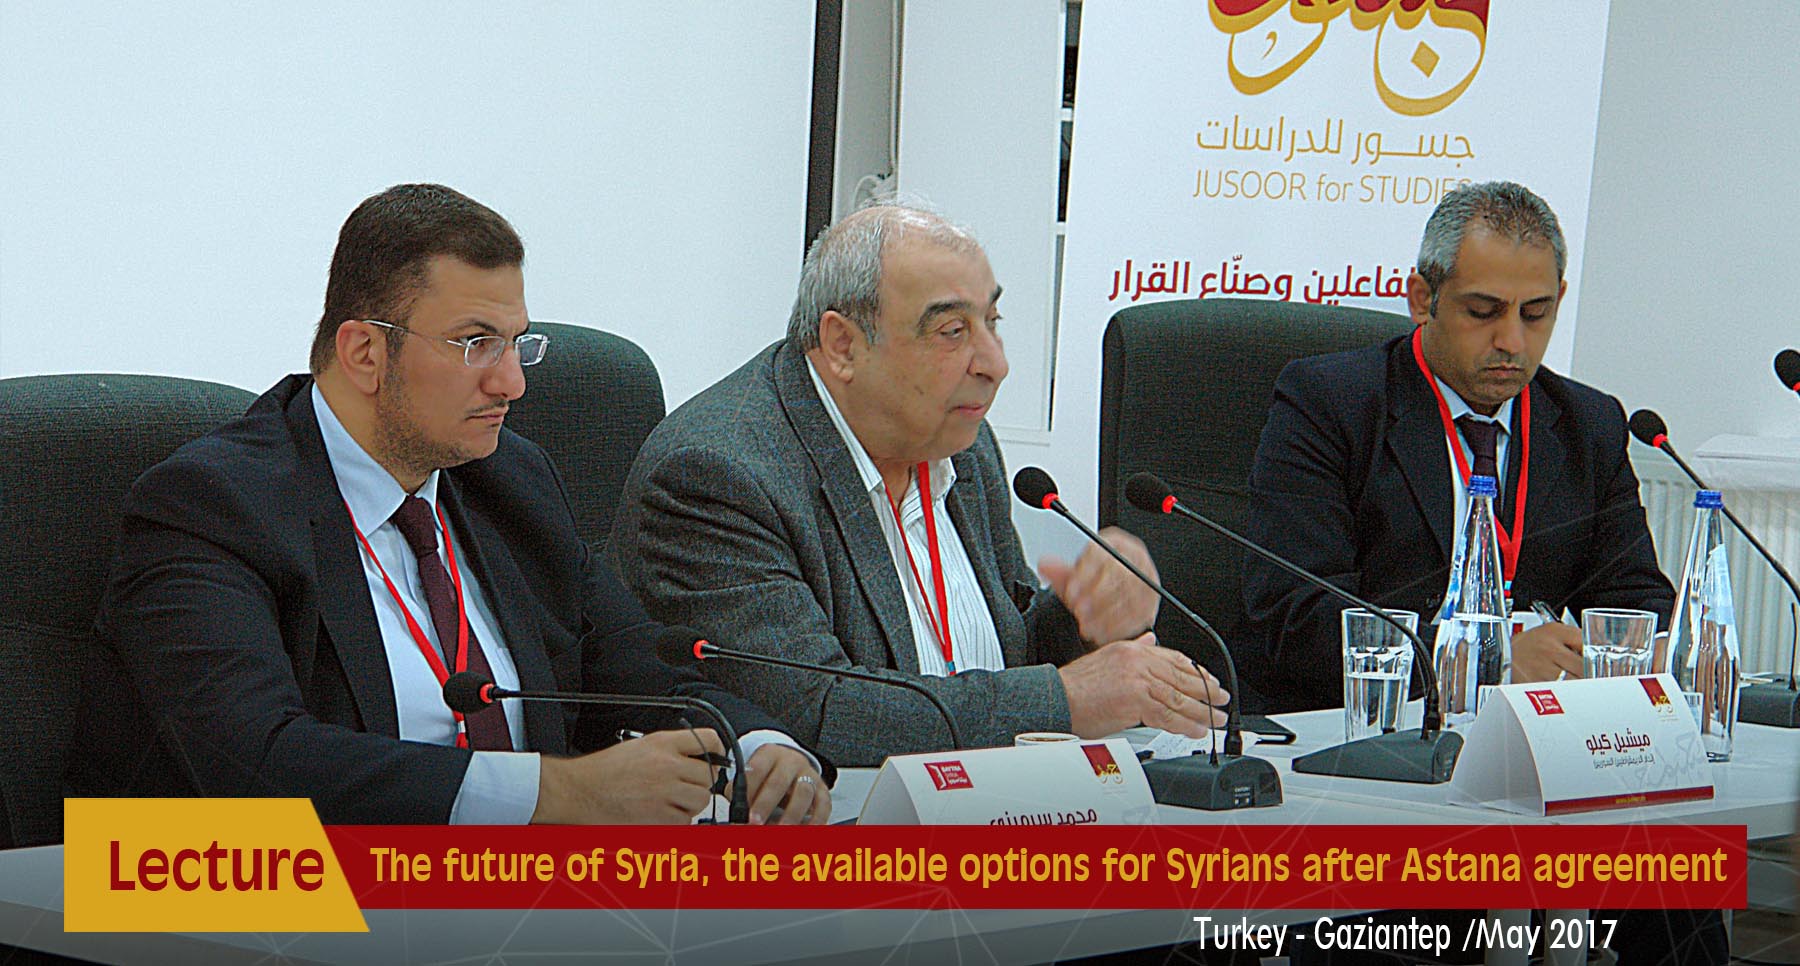 The future of Syria, the available options for Syrians after Astana agreement